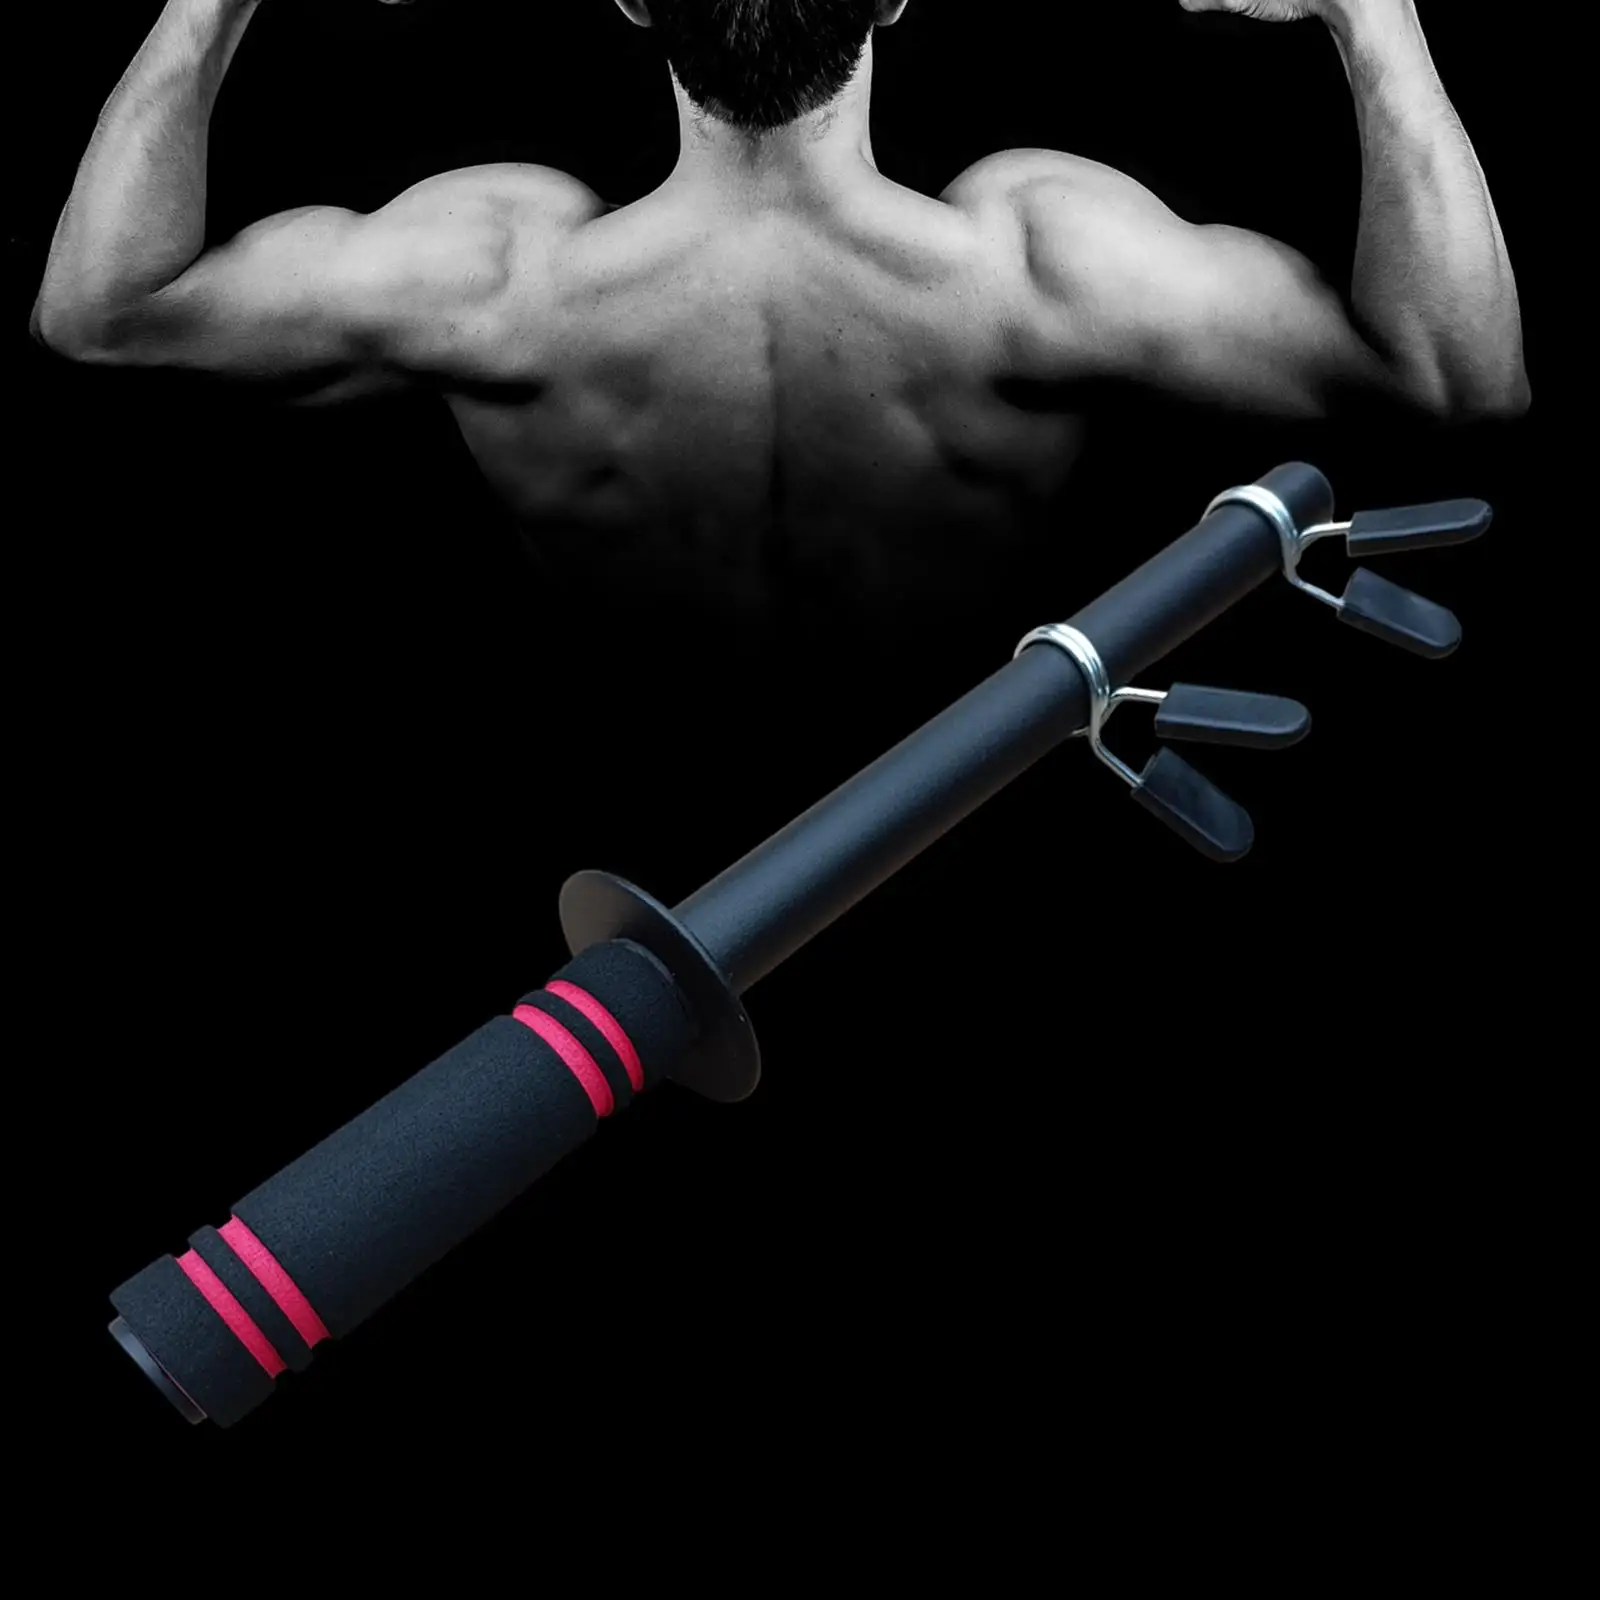 Dumbbell Bar Handle Weight Training Forearm Wrist Exerciser Forearm Trainer Home Gym Strength Training Work Out Supplies